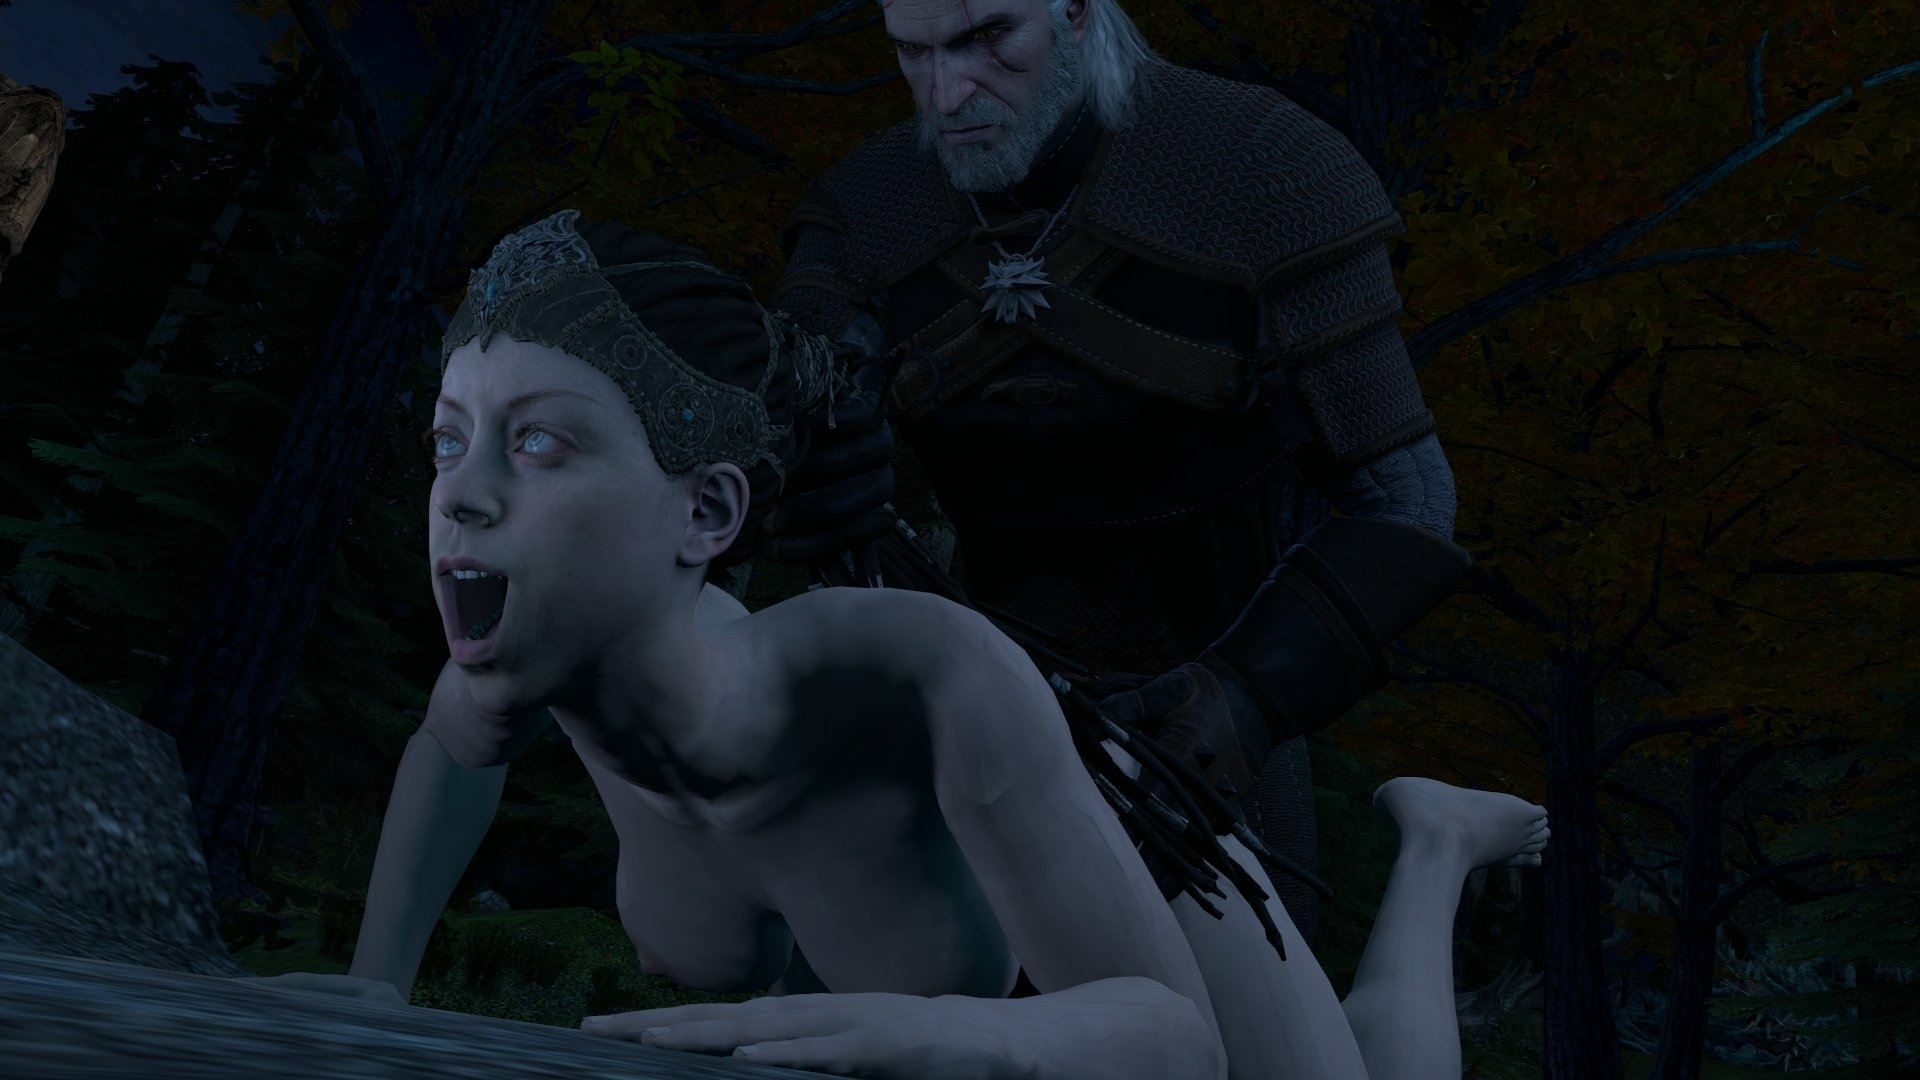 The Witcher/Hellblade Crossover: Geralt plows Senua Senua Geralt of rivia The Witcher Anal Anal Penetration Boobs Big boobs Tits Ass Big Ass Cake Sexy Horny Face Horny 3d Porn 4